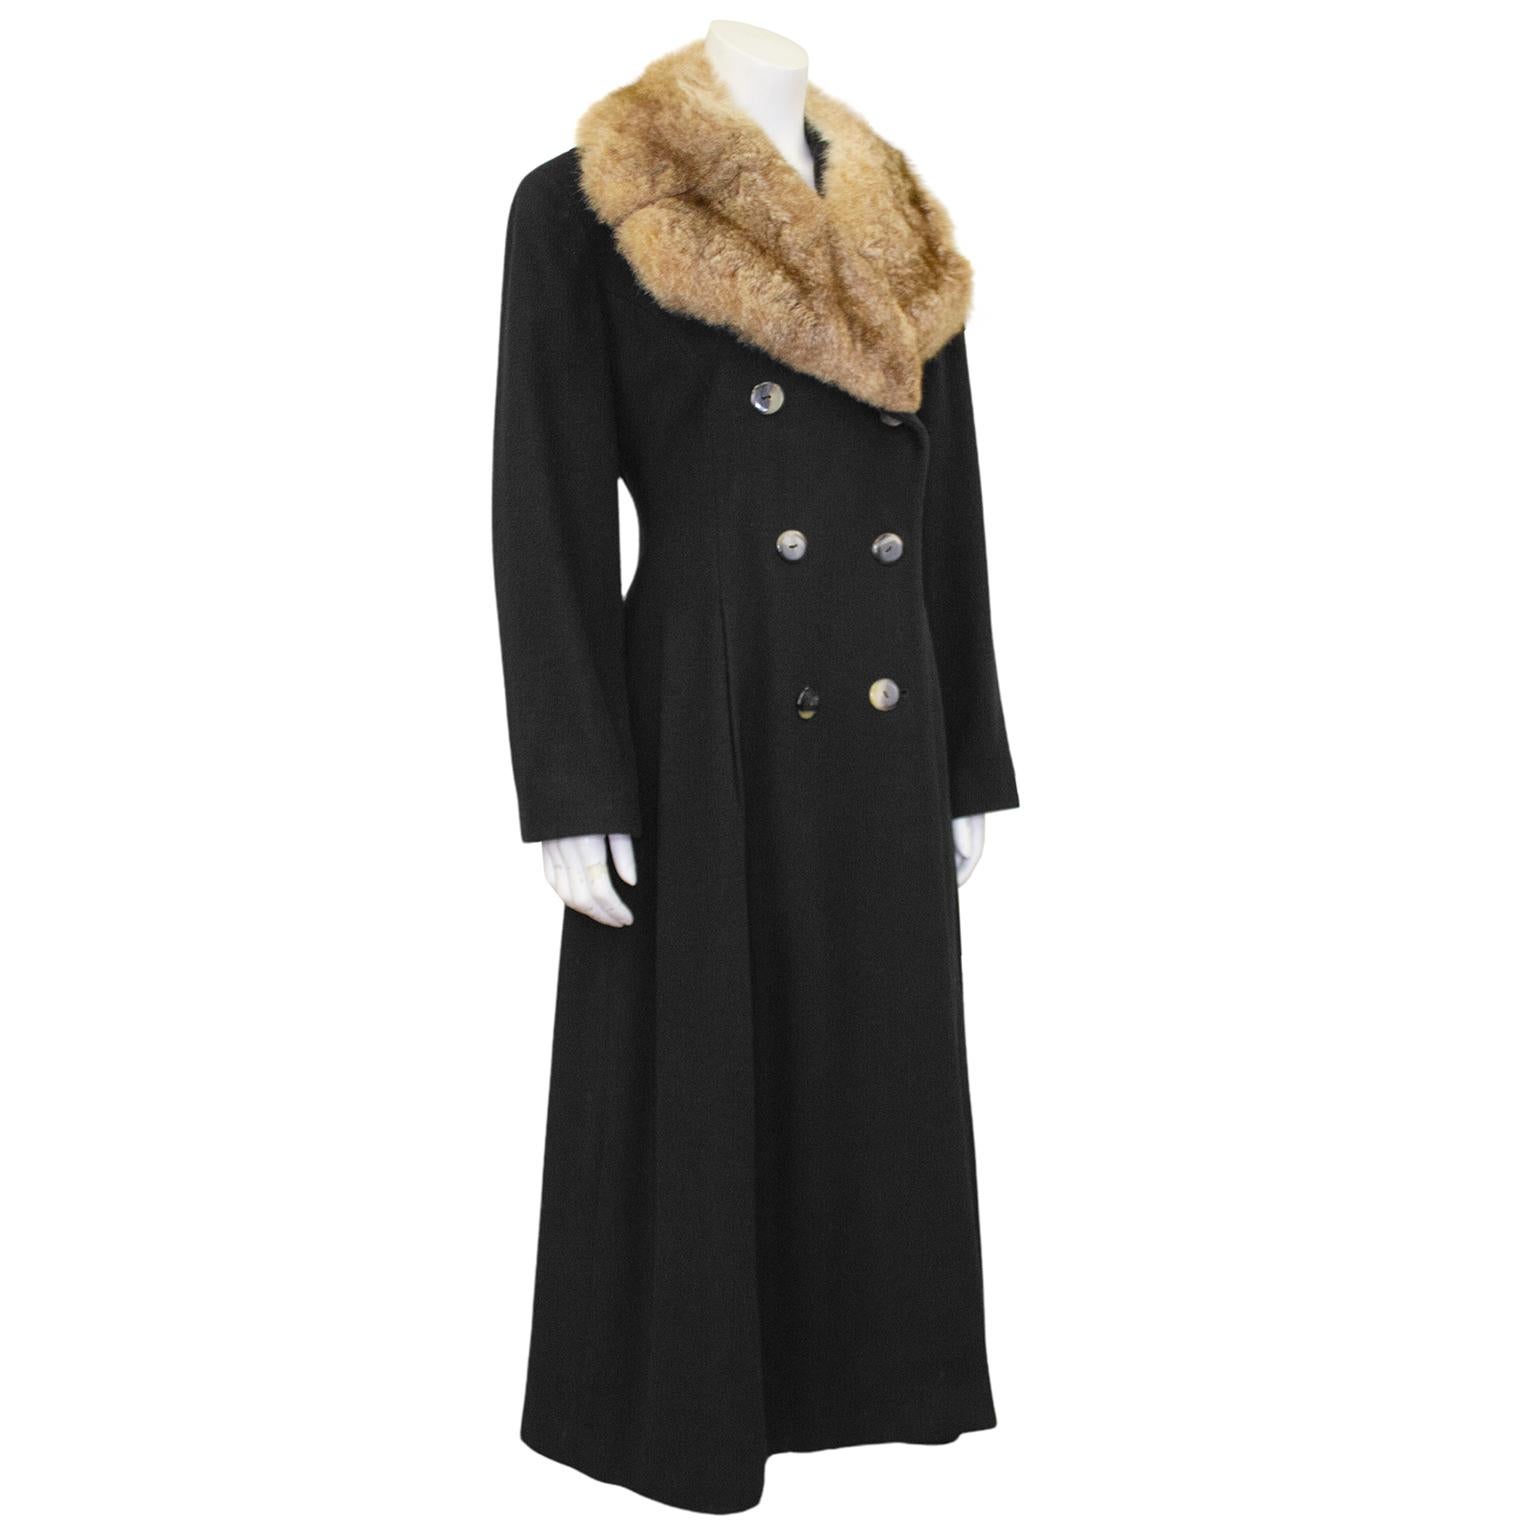 Perry Ellis princess style black wool maxi coat with fur collar from the 1980's, the height of his too short career. Fitted through the waist, double breasted faux tortoise button closure, sweeping fullness to the skirt, and a half belt at the back